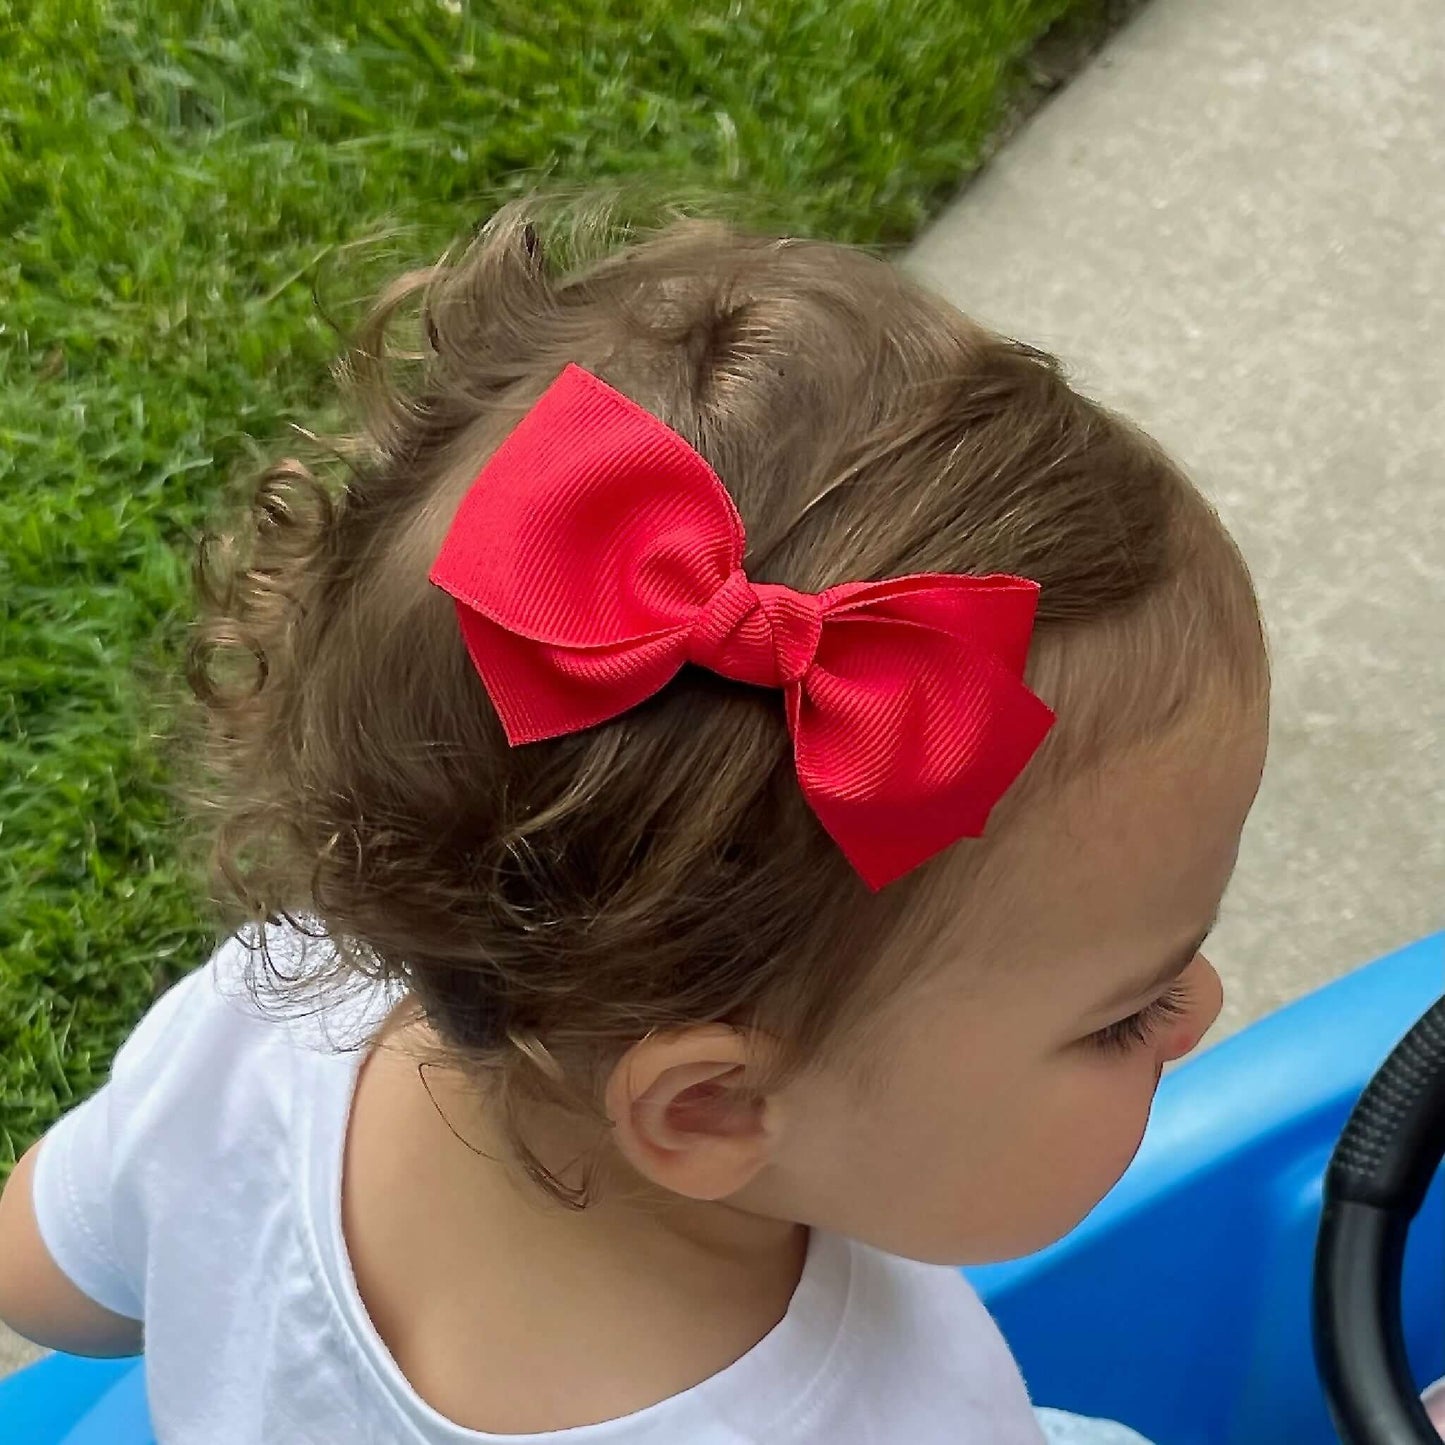 Toddler wearing a red grosgrain bow hair clip, perfect for any outfit, outdoors.